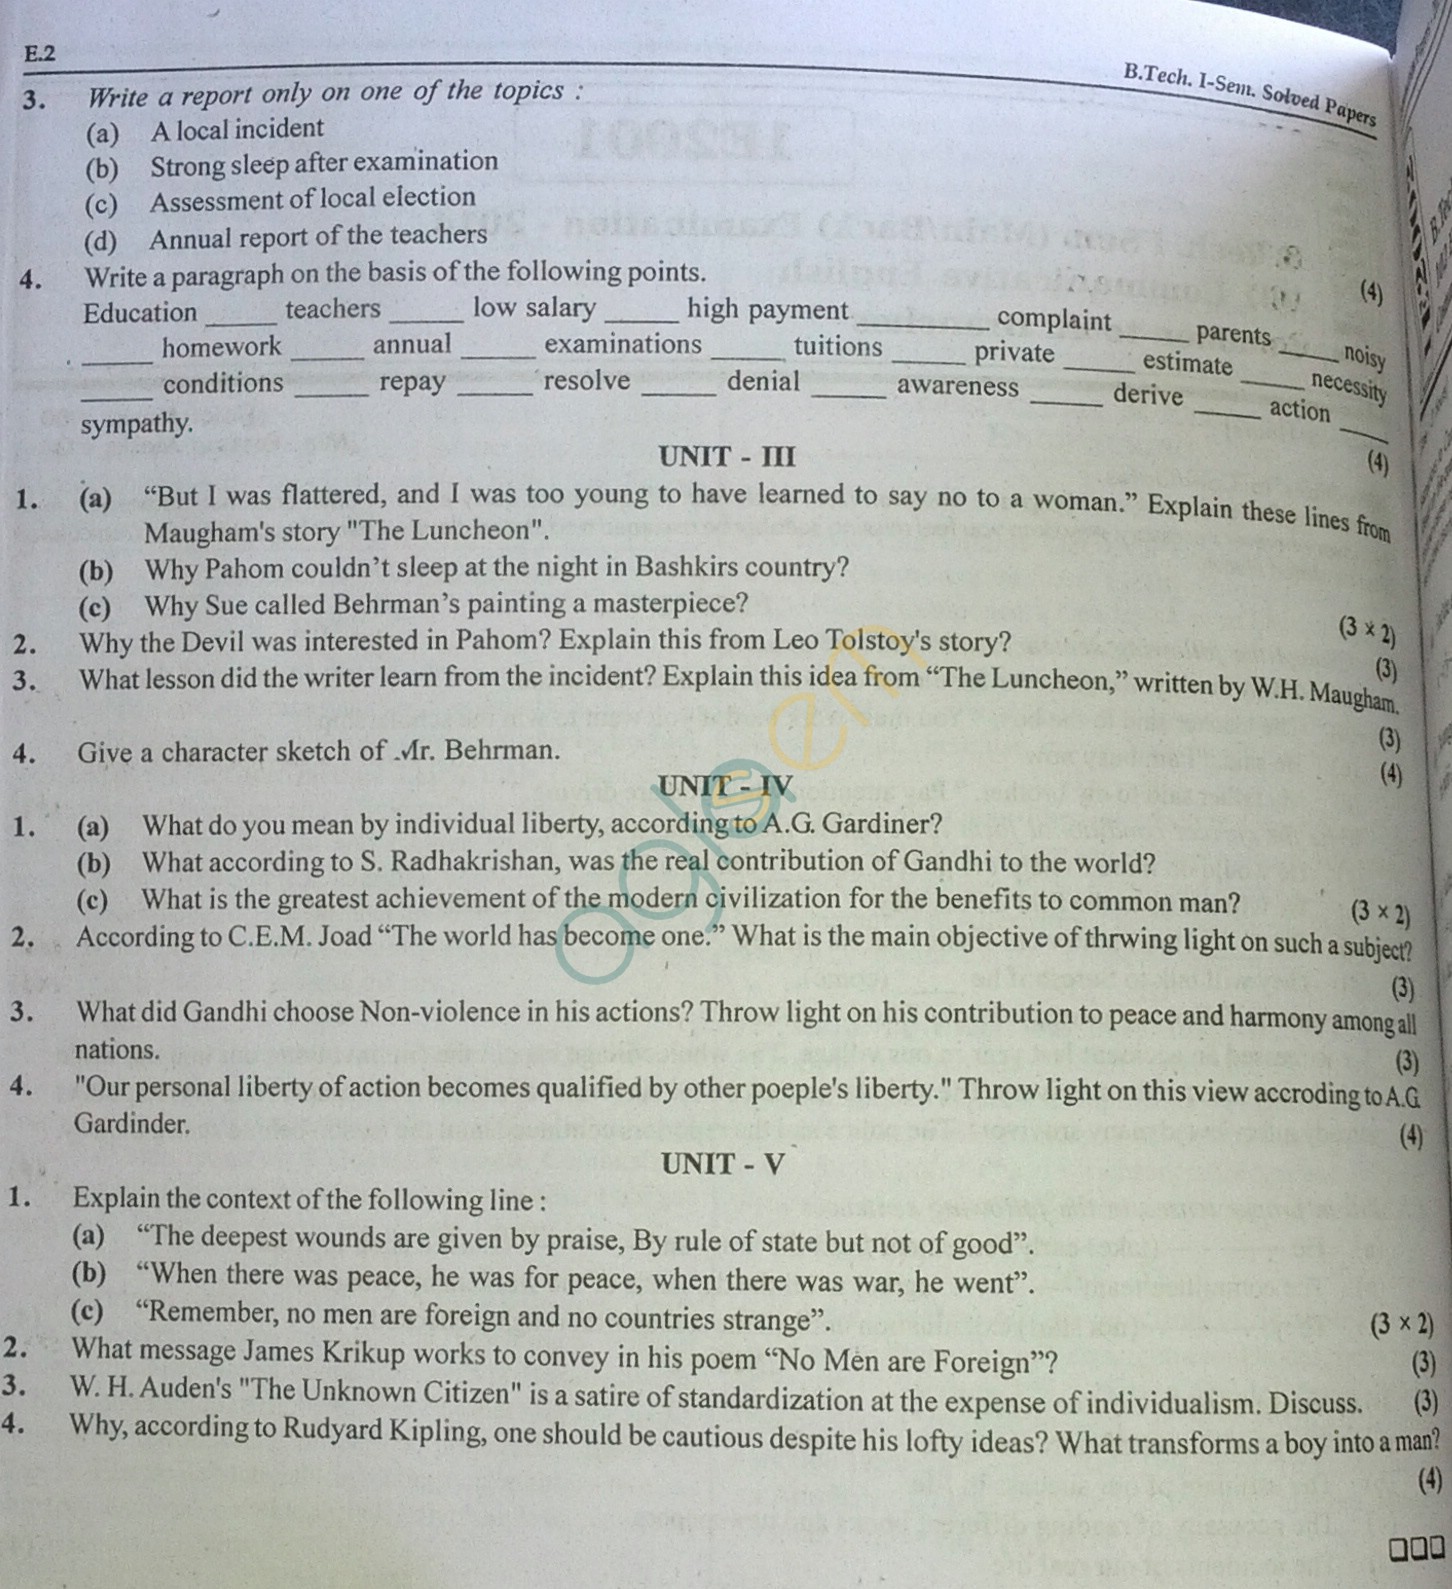 RTU: Question Papers 2014 - 1 Semester - All Branches - 1E2001